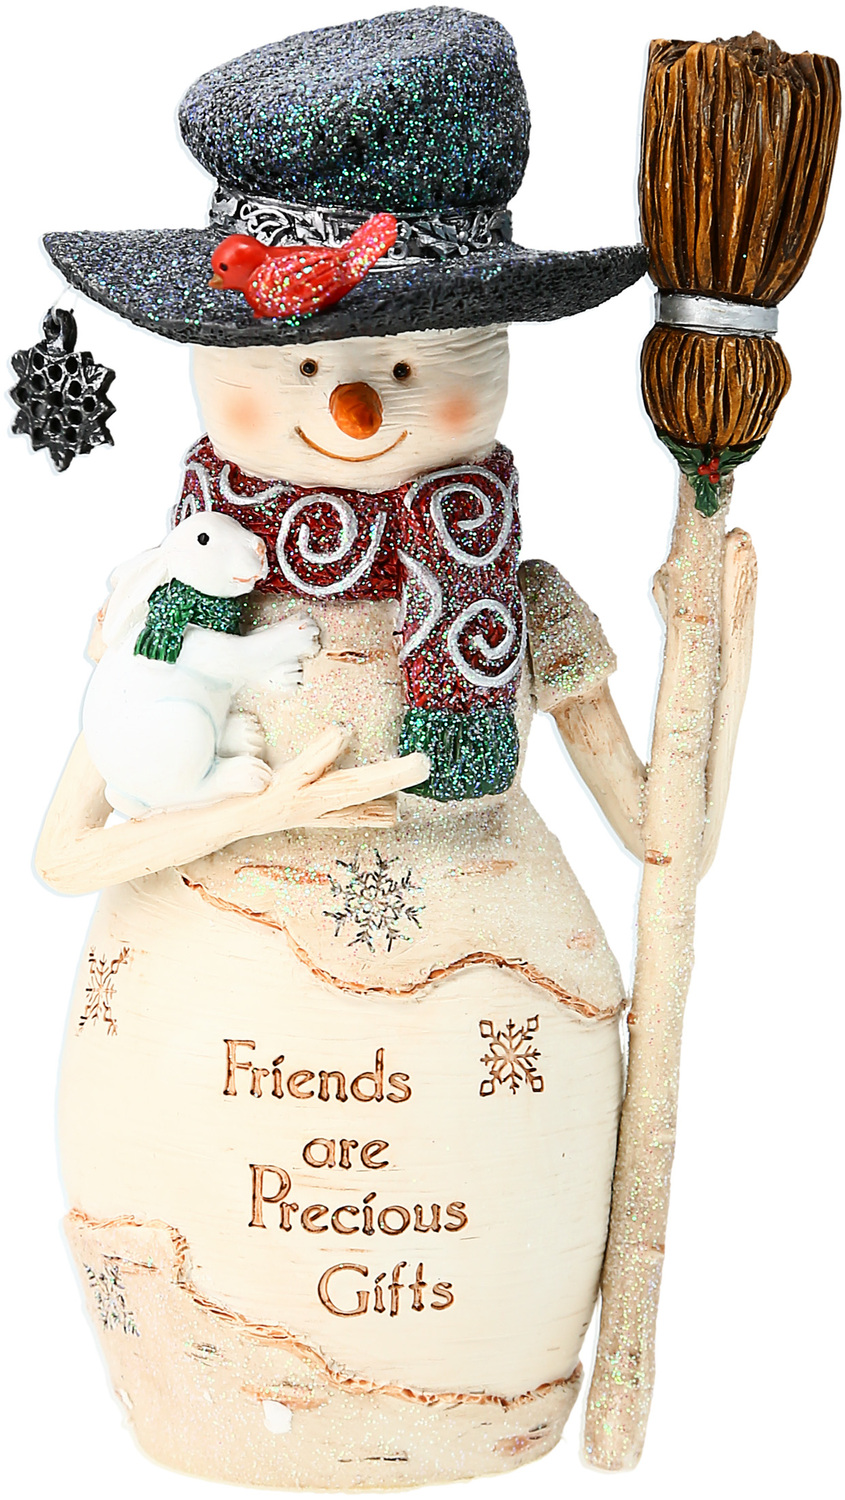 Precious Gifts by The Birchhearts - Precious Gifts - 6" Snowman holding a Broom 